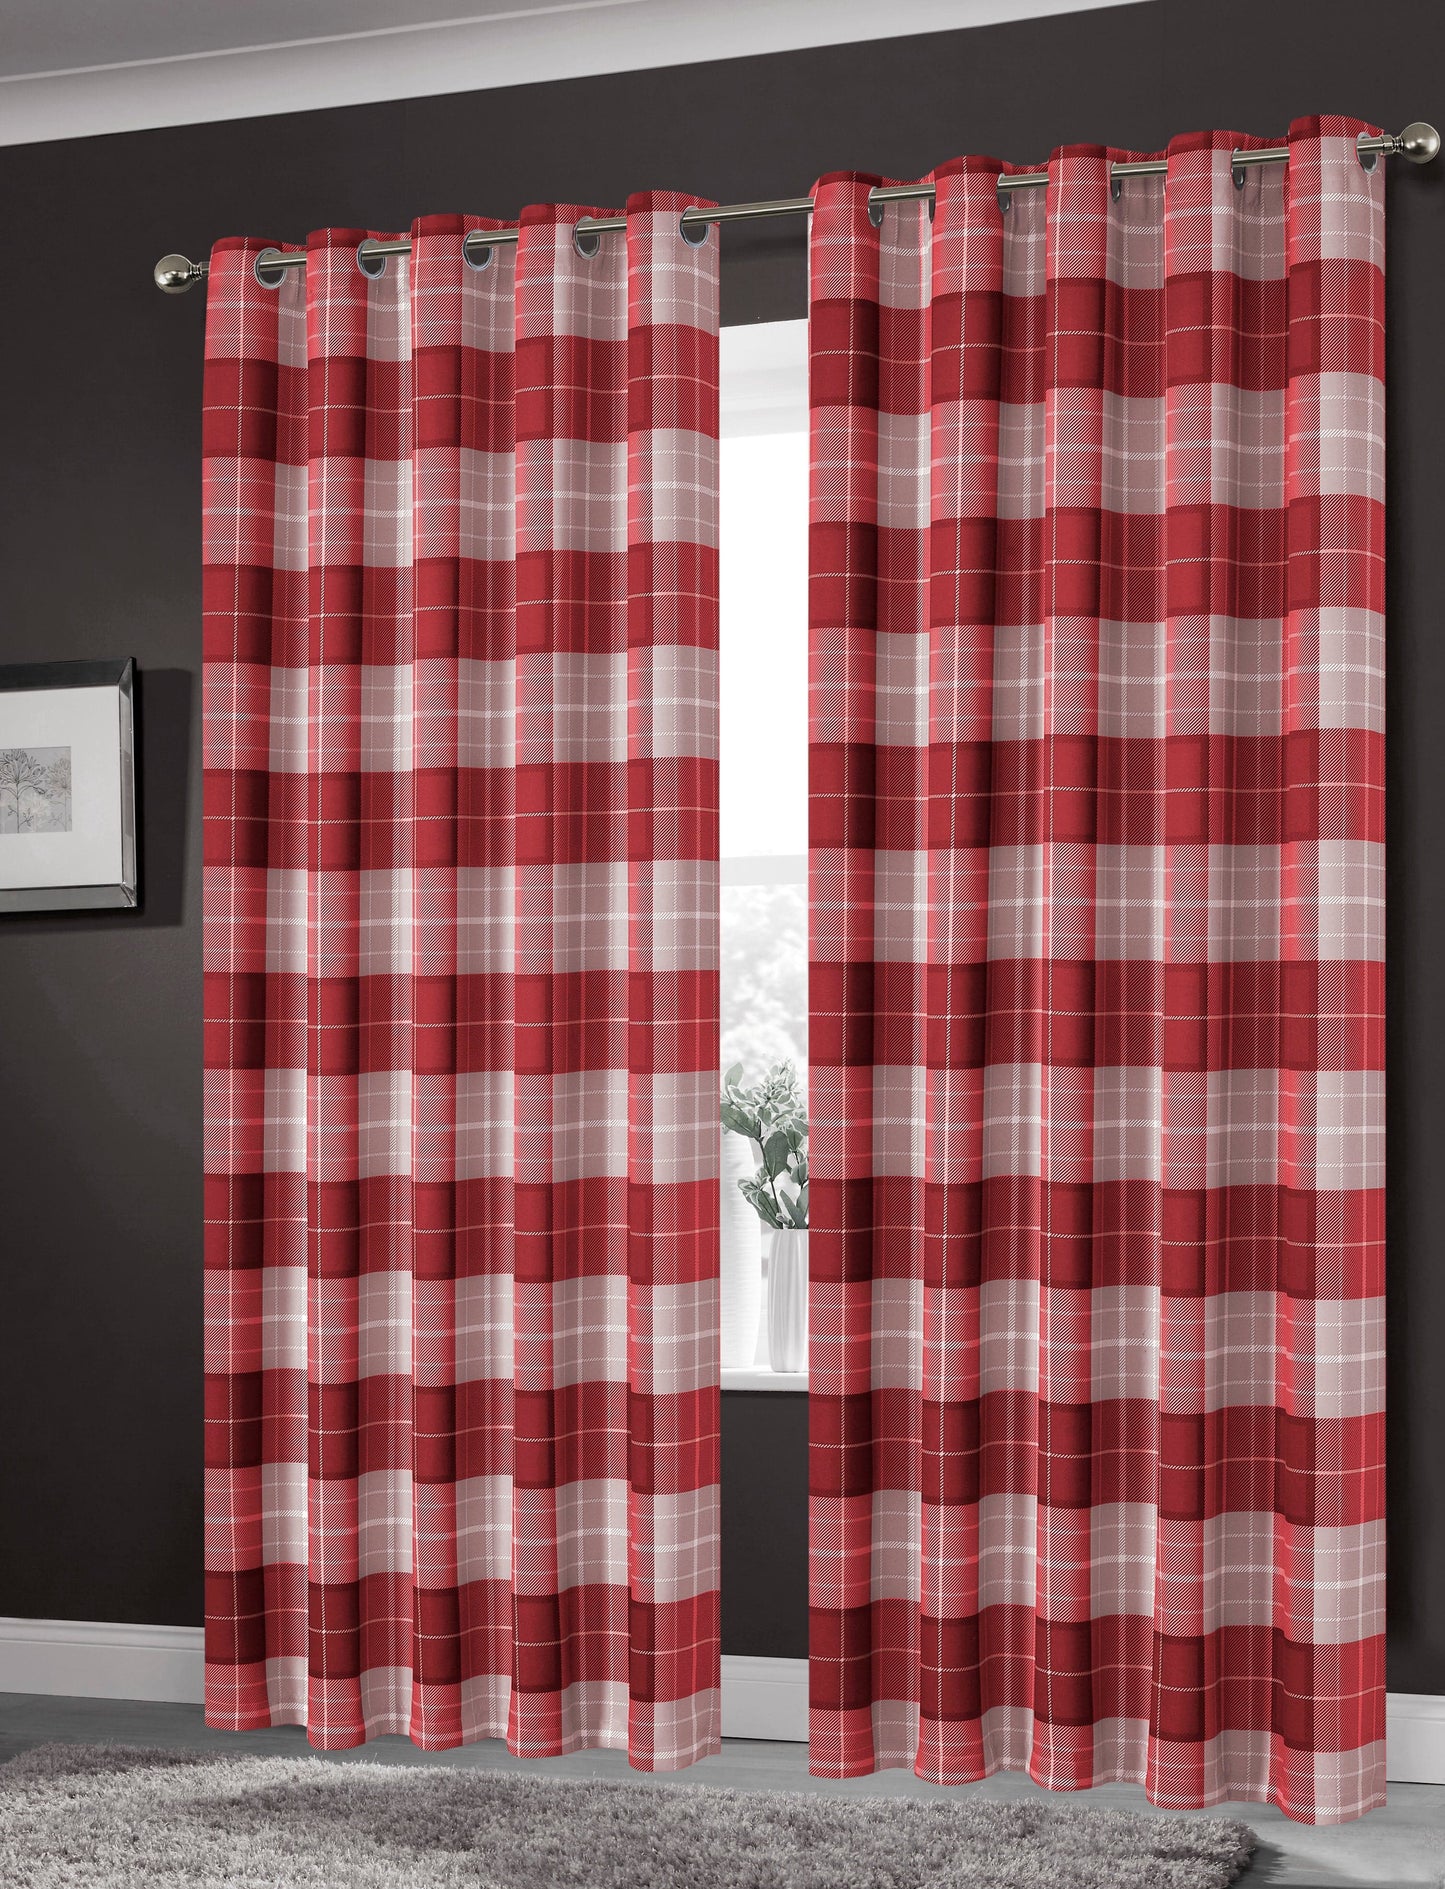 Printed Blackout Curtains OLIVIA ROCCO Curtain